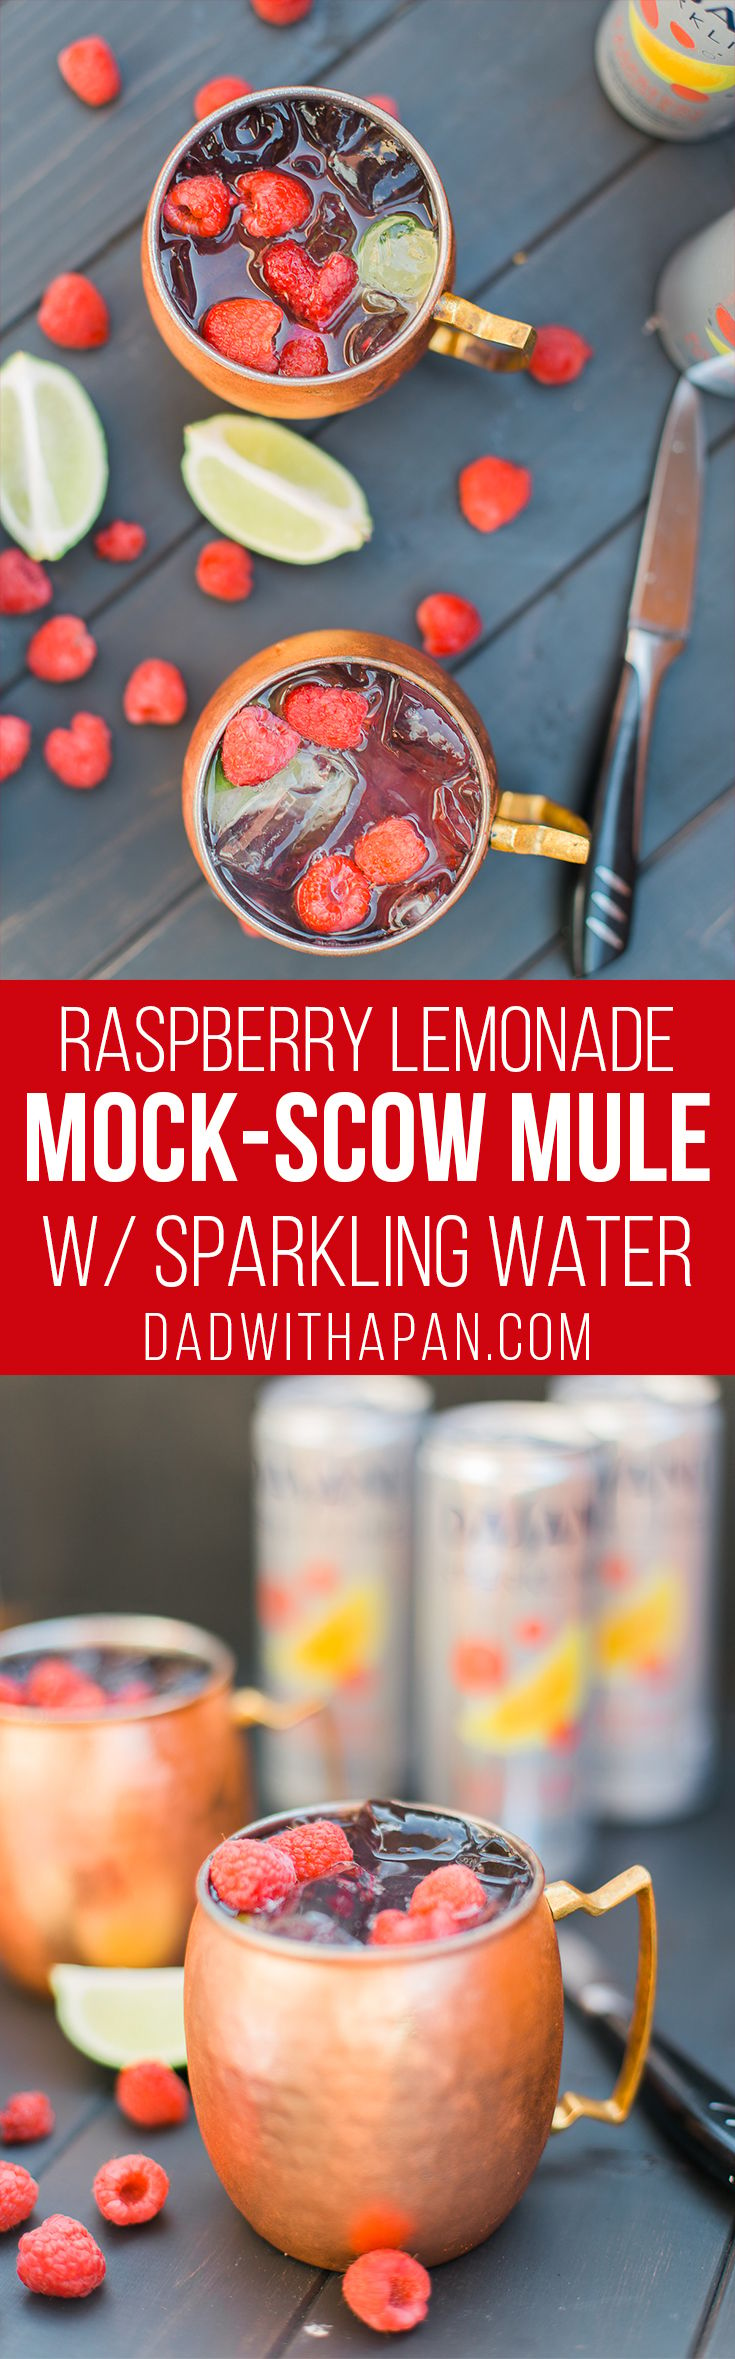 This Virgin Raspberry Lemonade Moscow Mule is the perfect #Mocktail for the summer! #Drinks #NonAlcoholic 